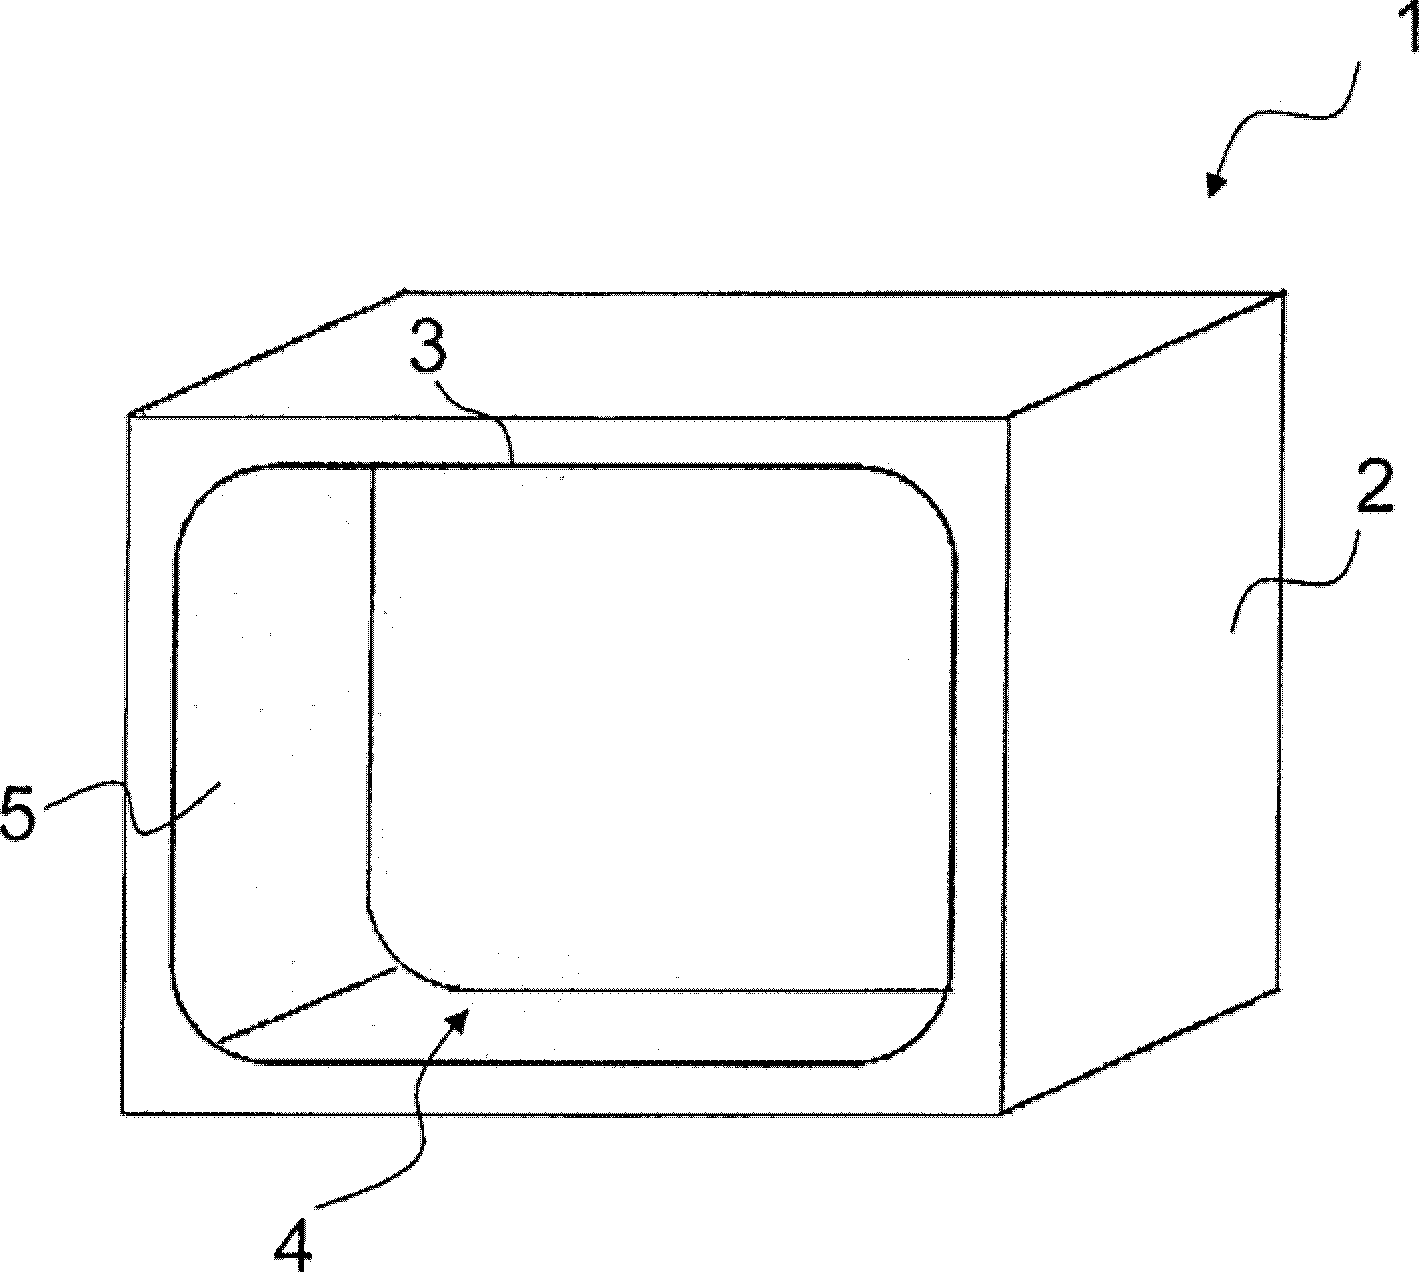 Enamel coating, coated article and method of coating an article